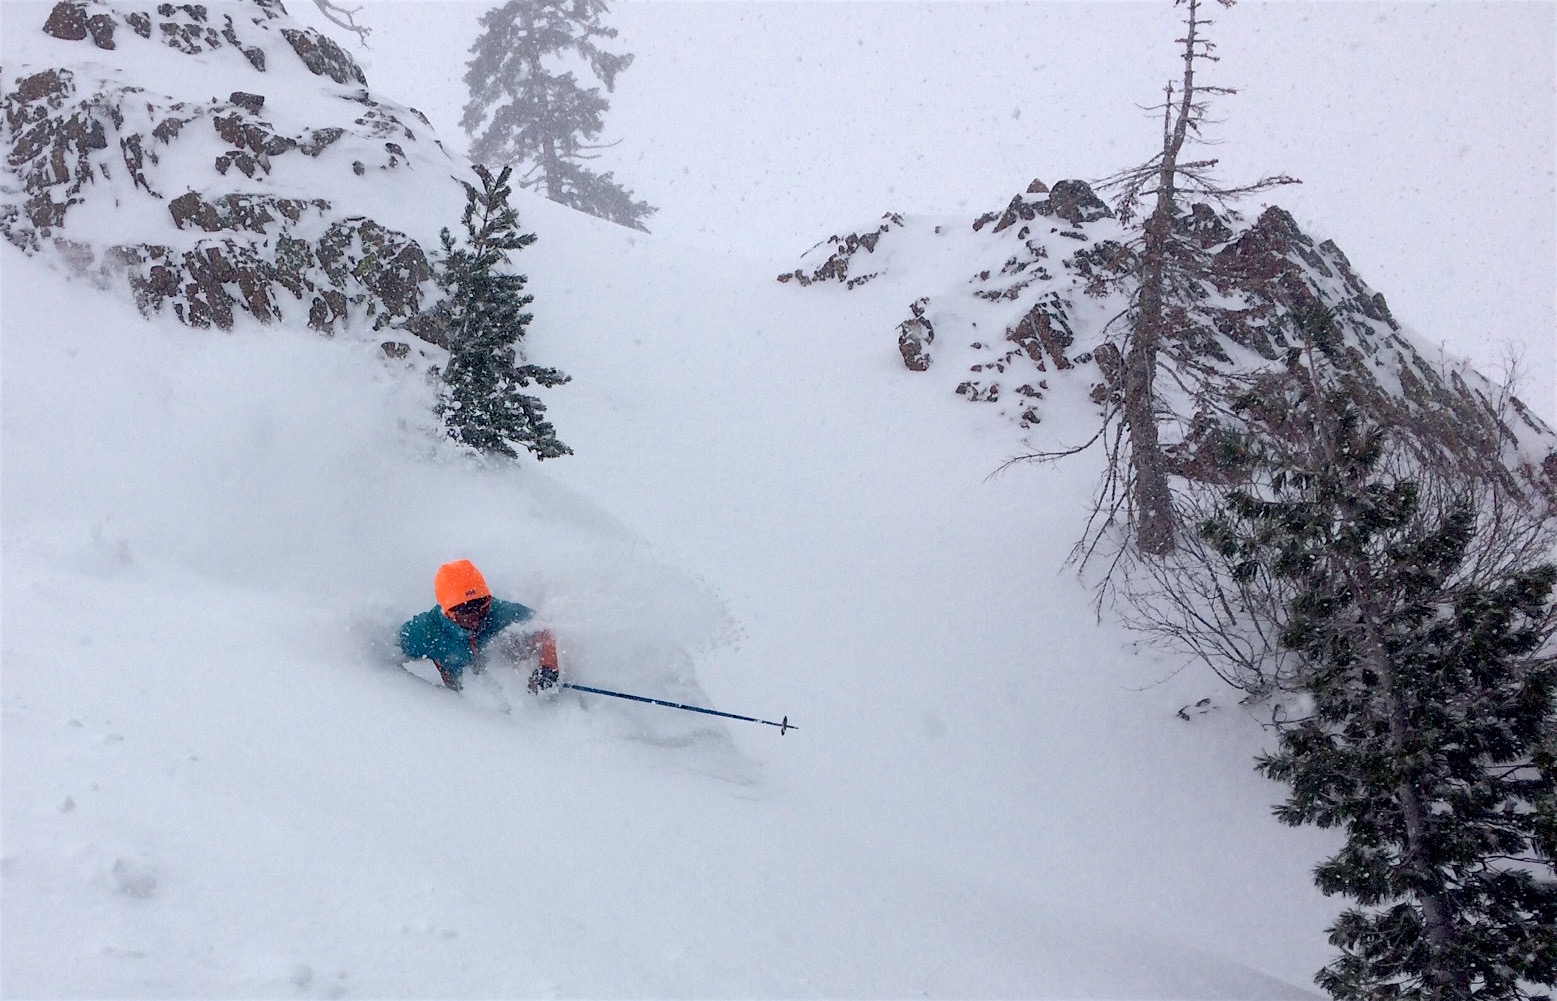 Miles loving it in the deep today at Alpine. photo: alan ashbaugh